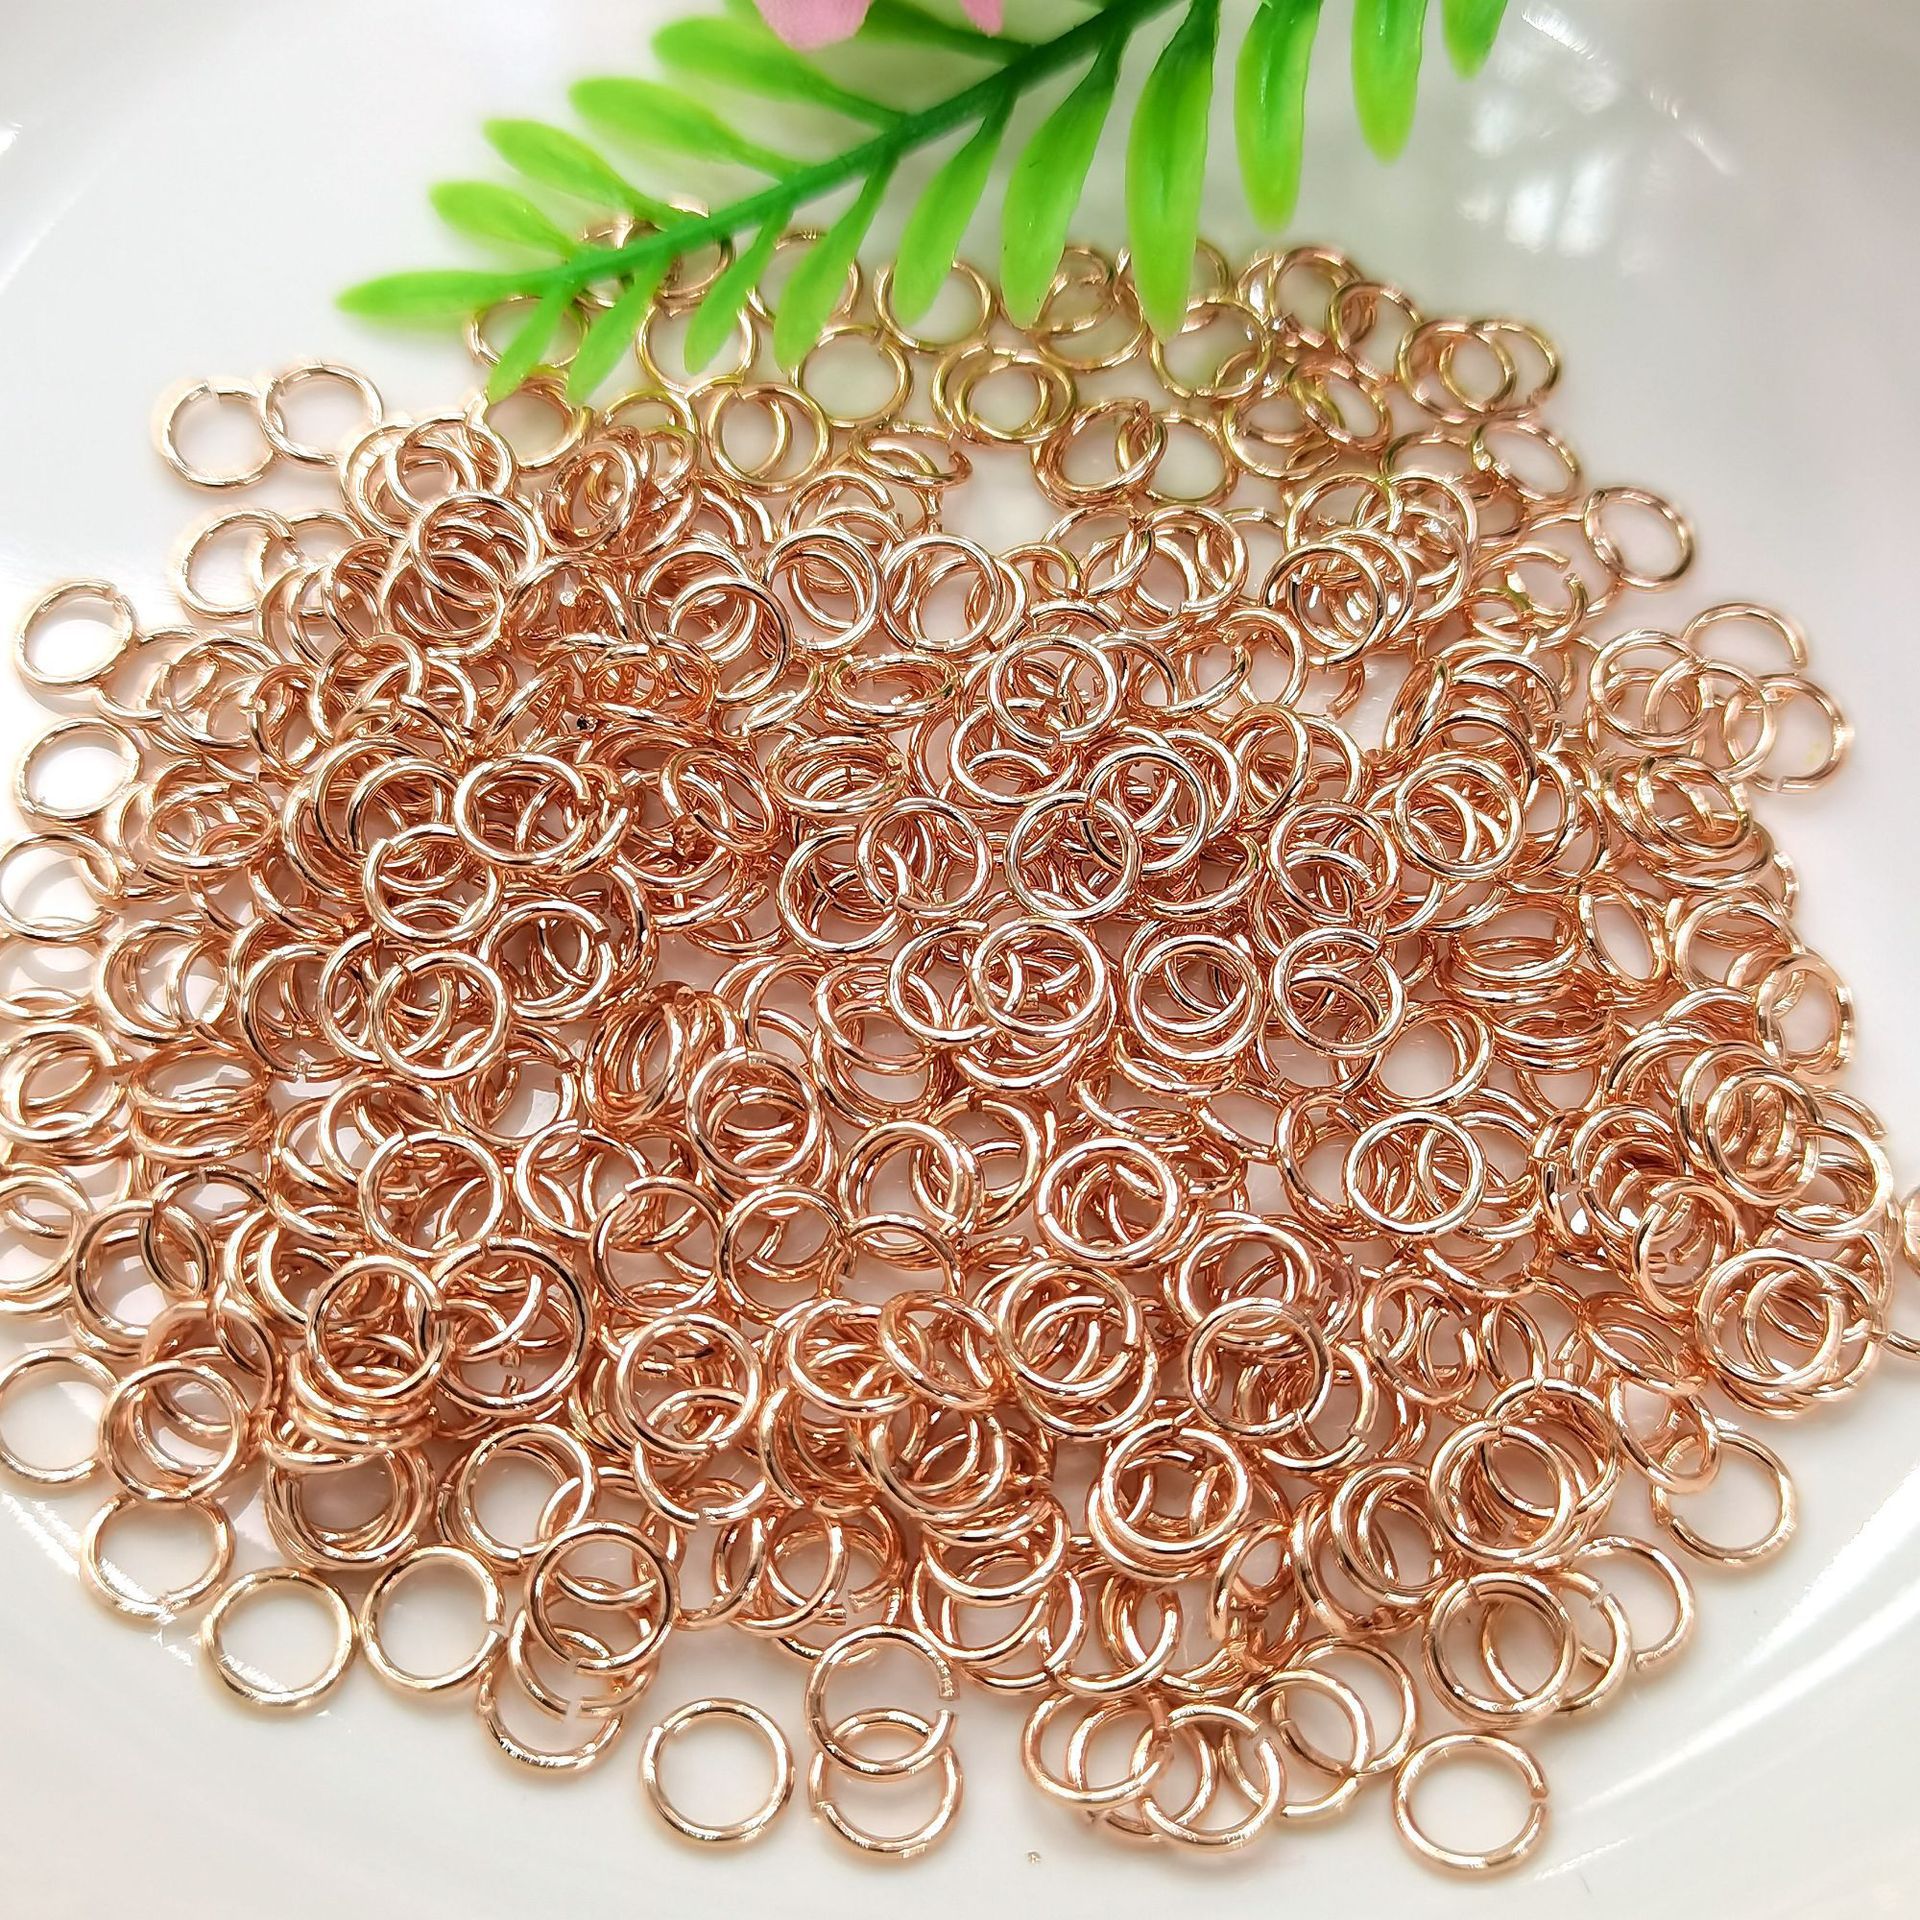 Rose gold 0.8*7mm (about 12 per gram)